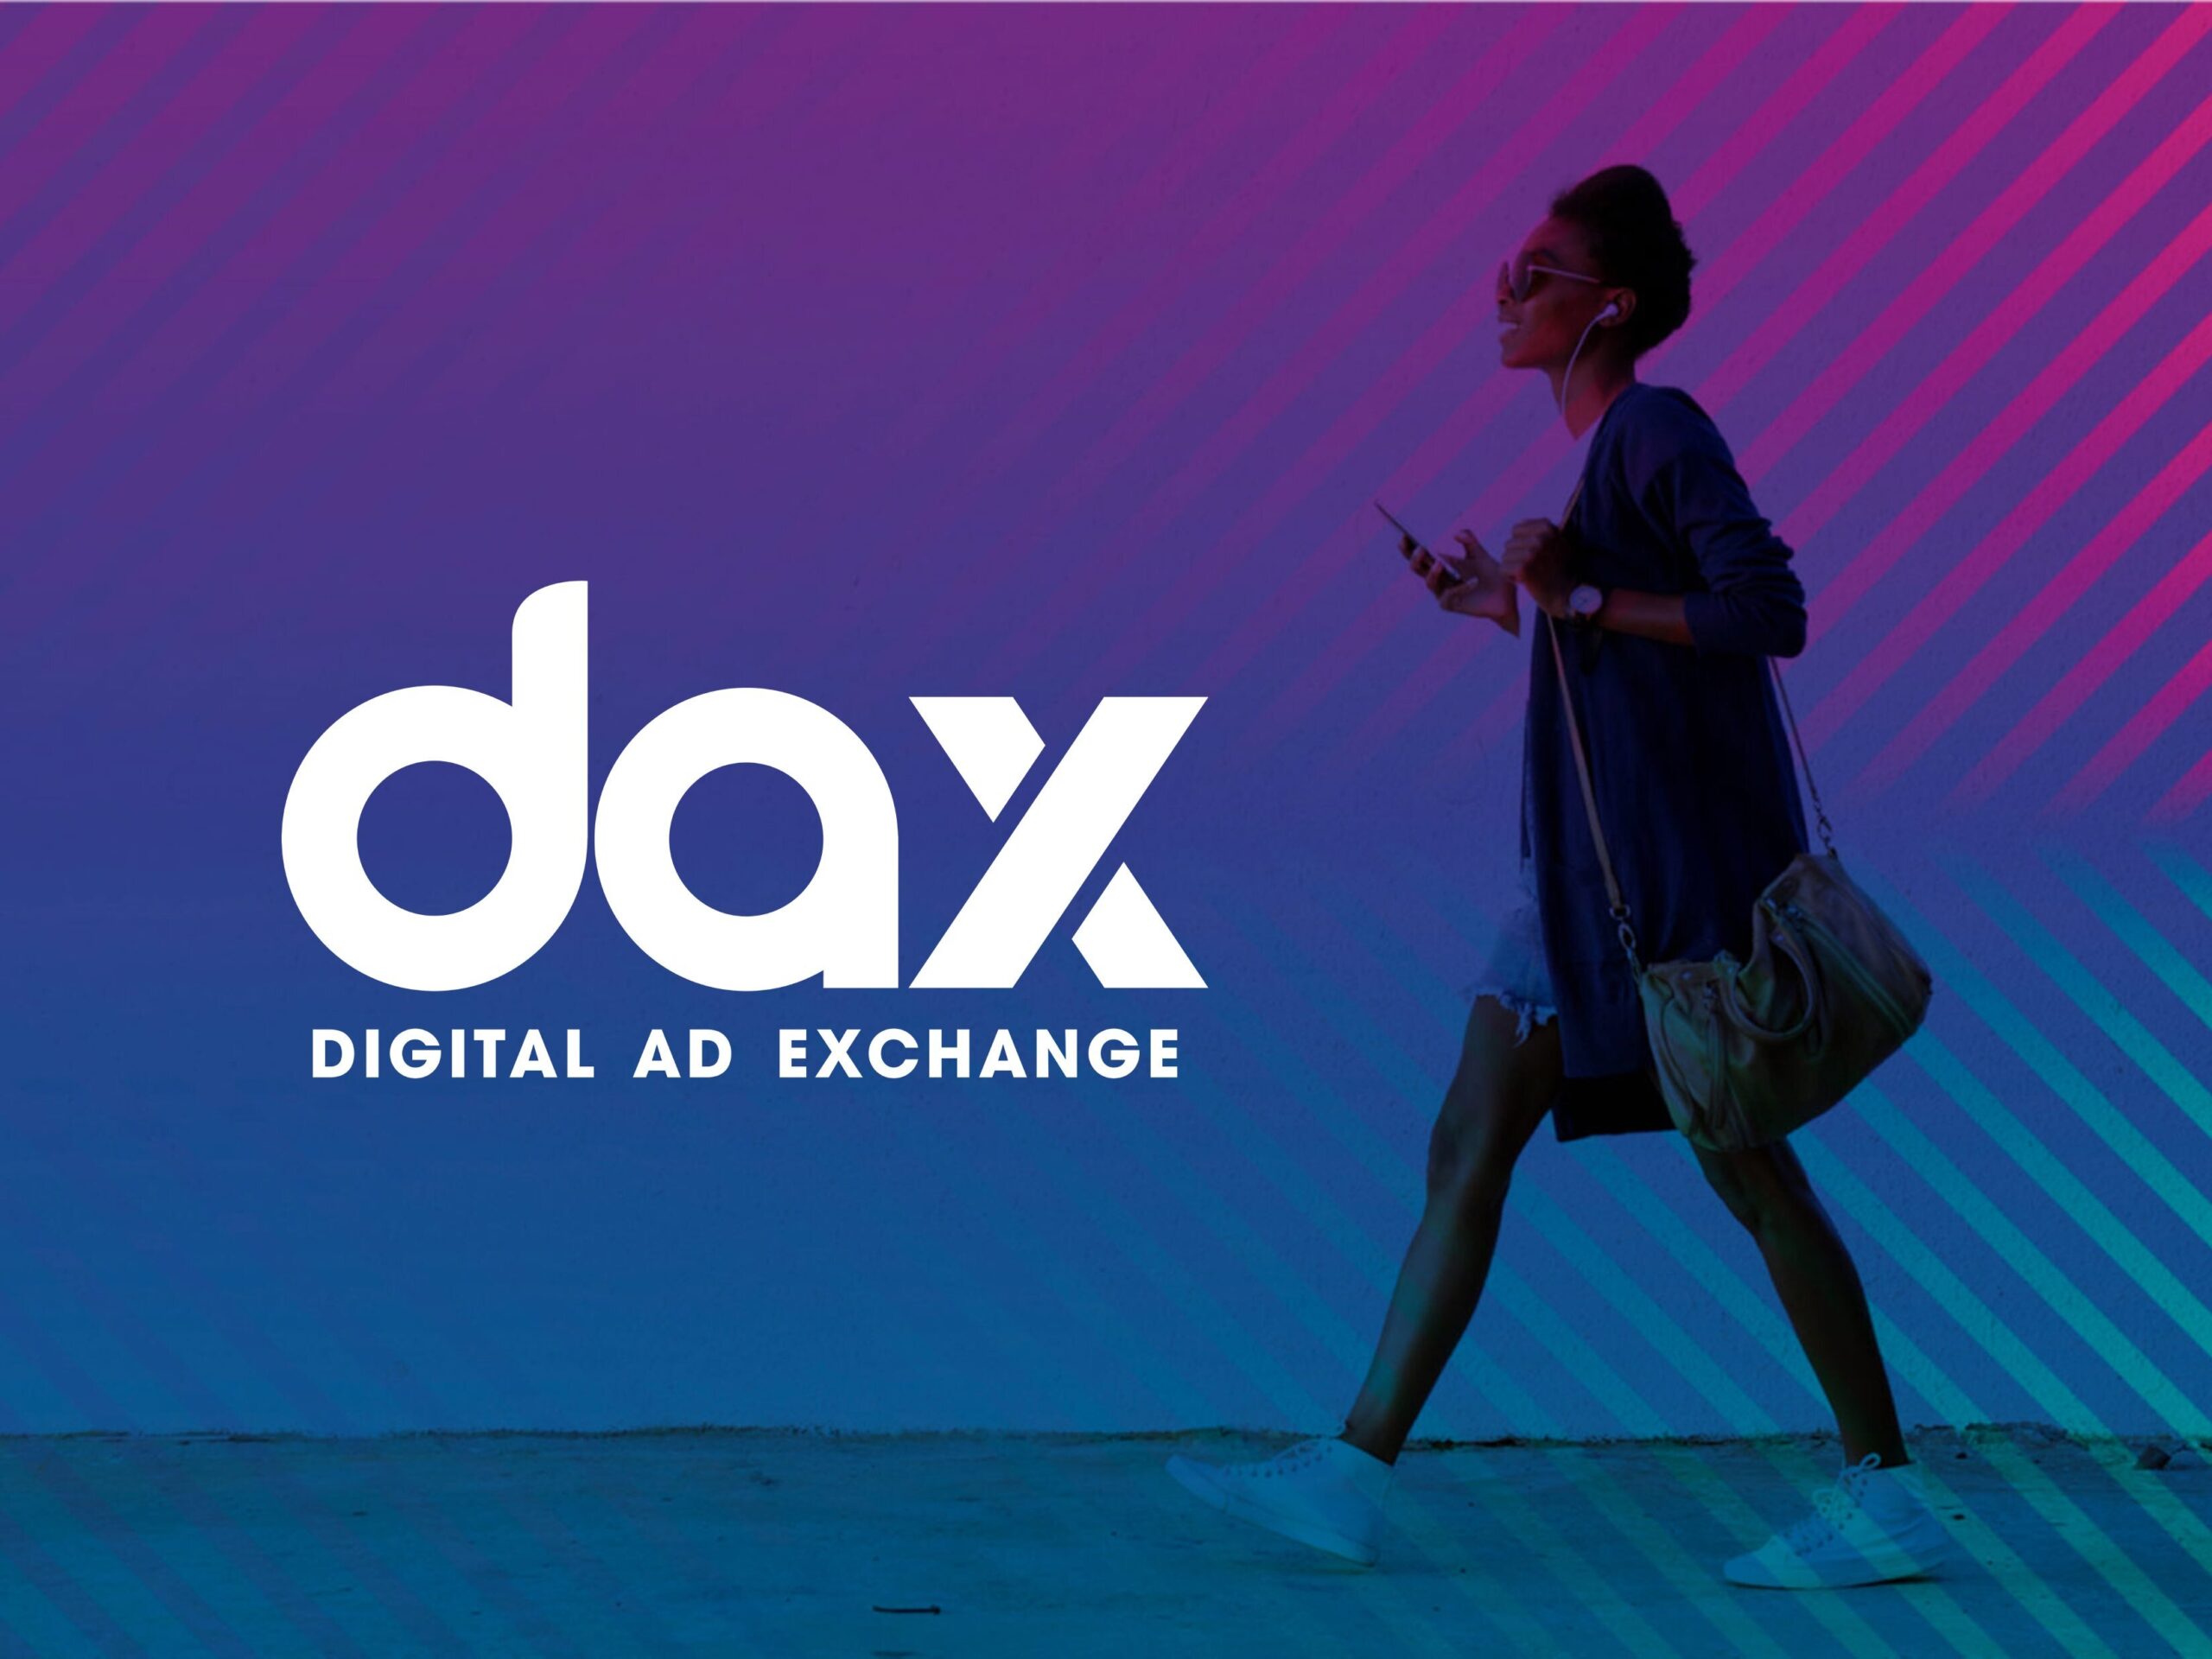 DAX US Exclusively Partners with Frequency to Offer Data-Driven Dynamic Audio Advertising